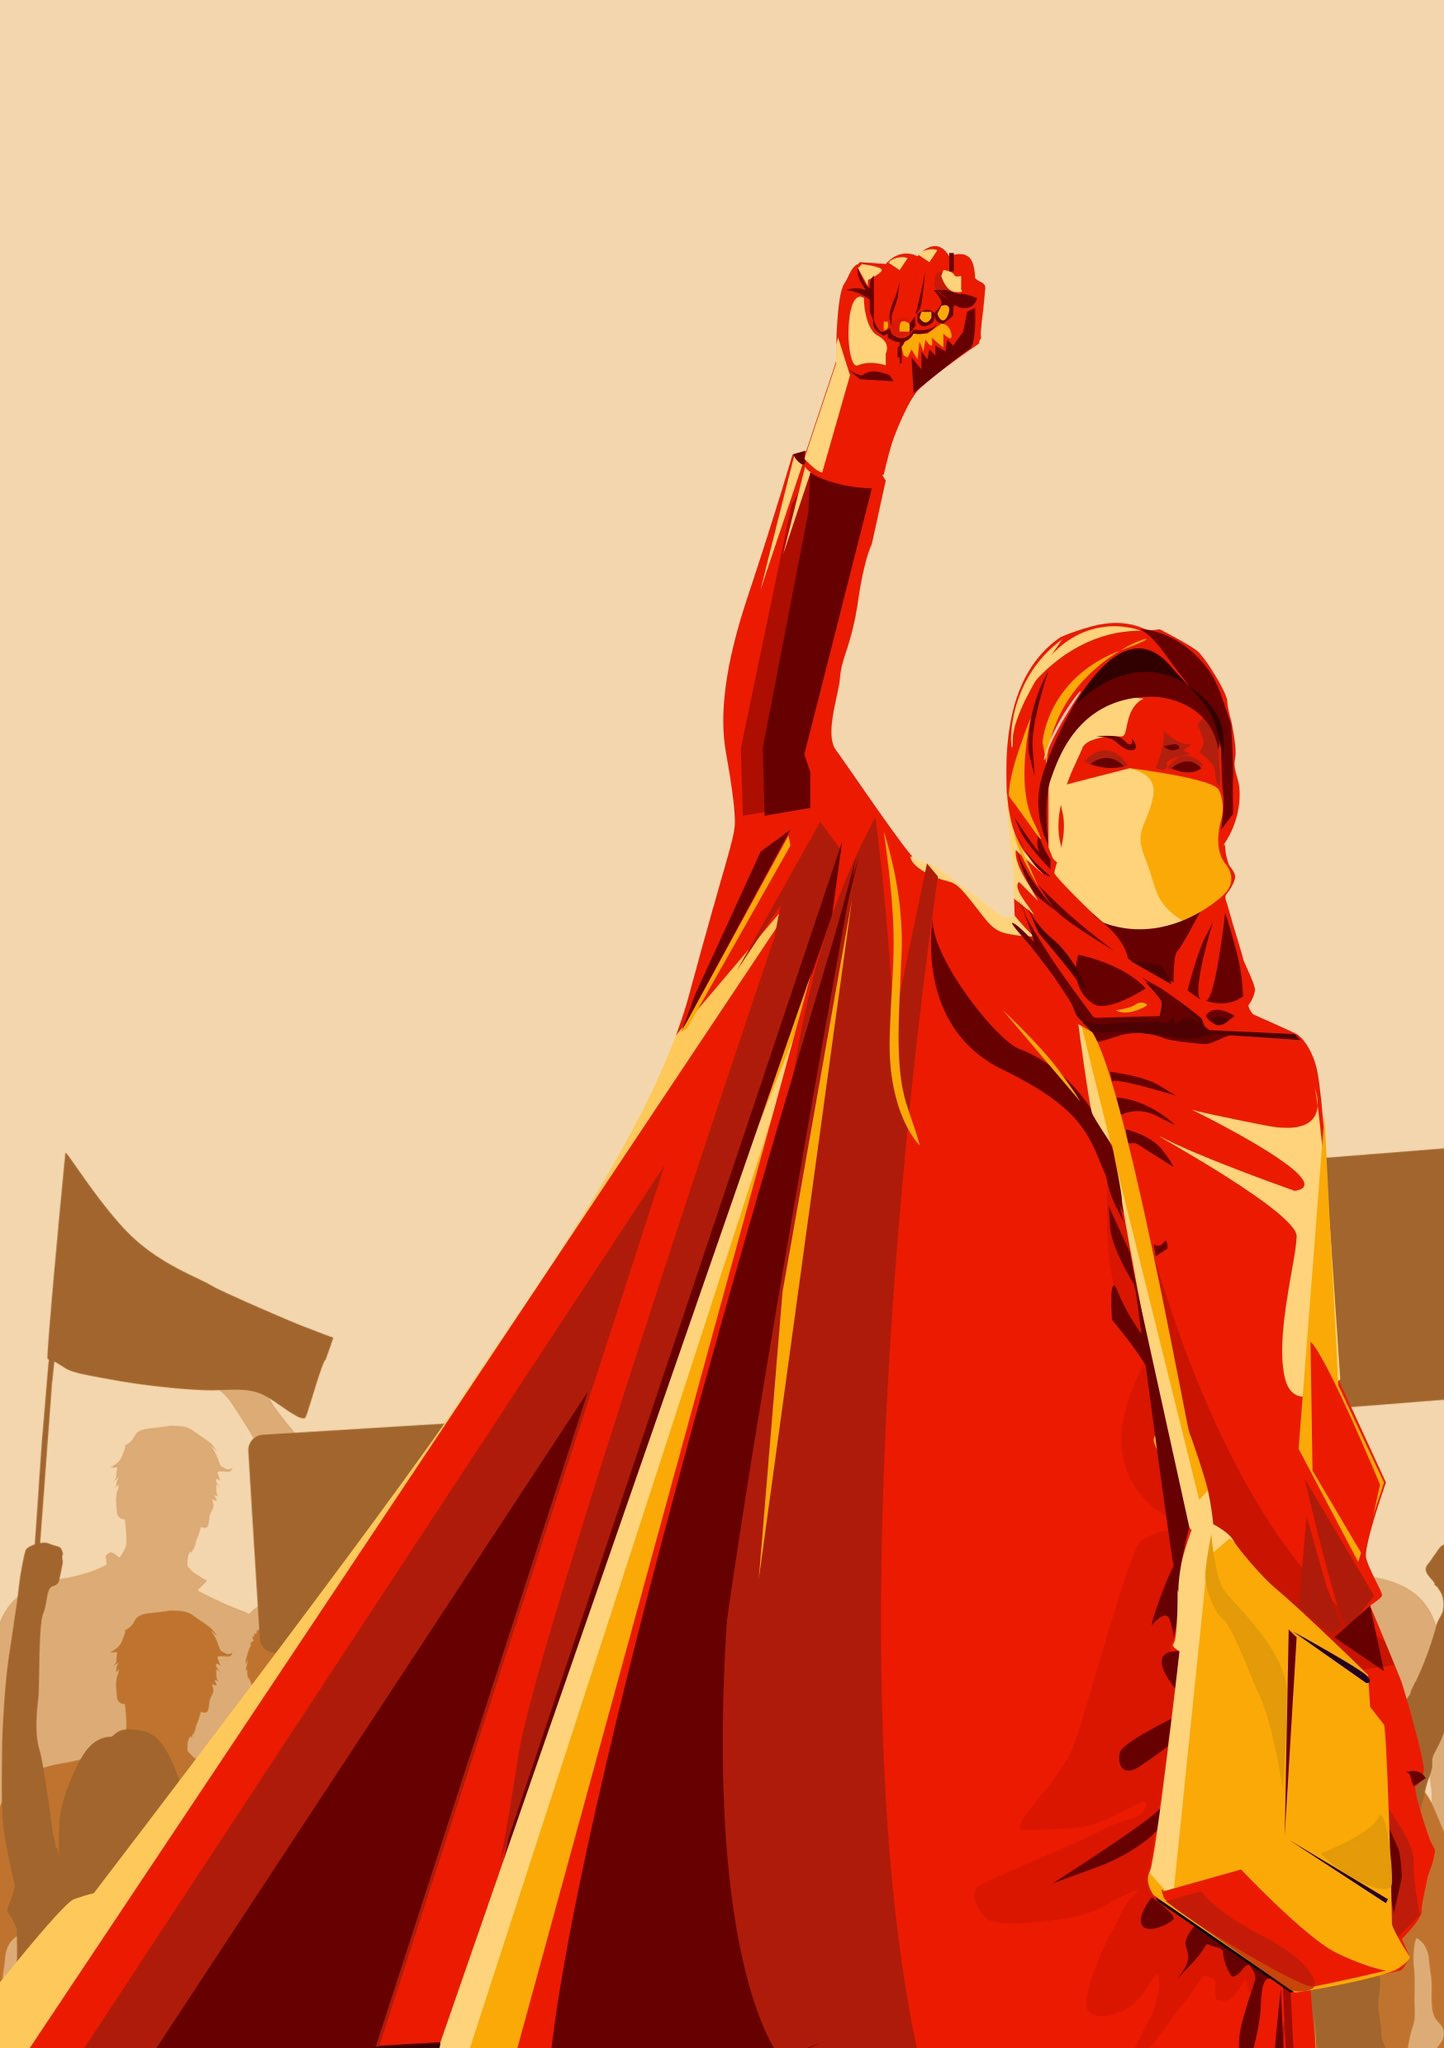 An illustration of a woman holding up her hand in protest/solidarity by Nonso Eagle